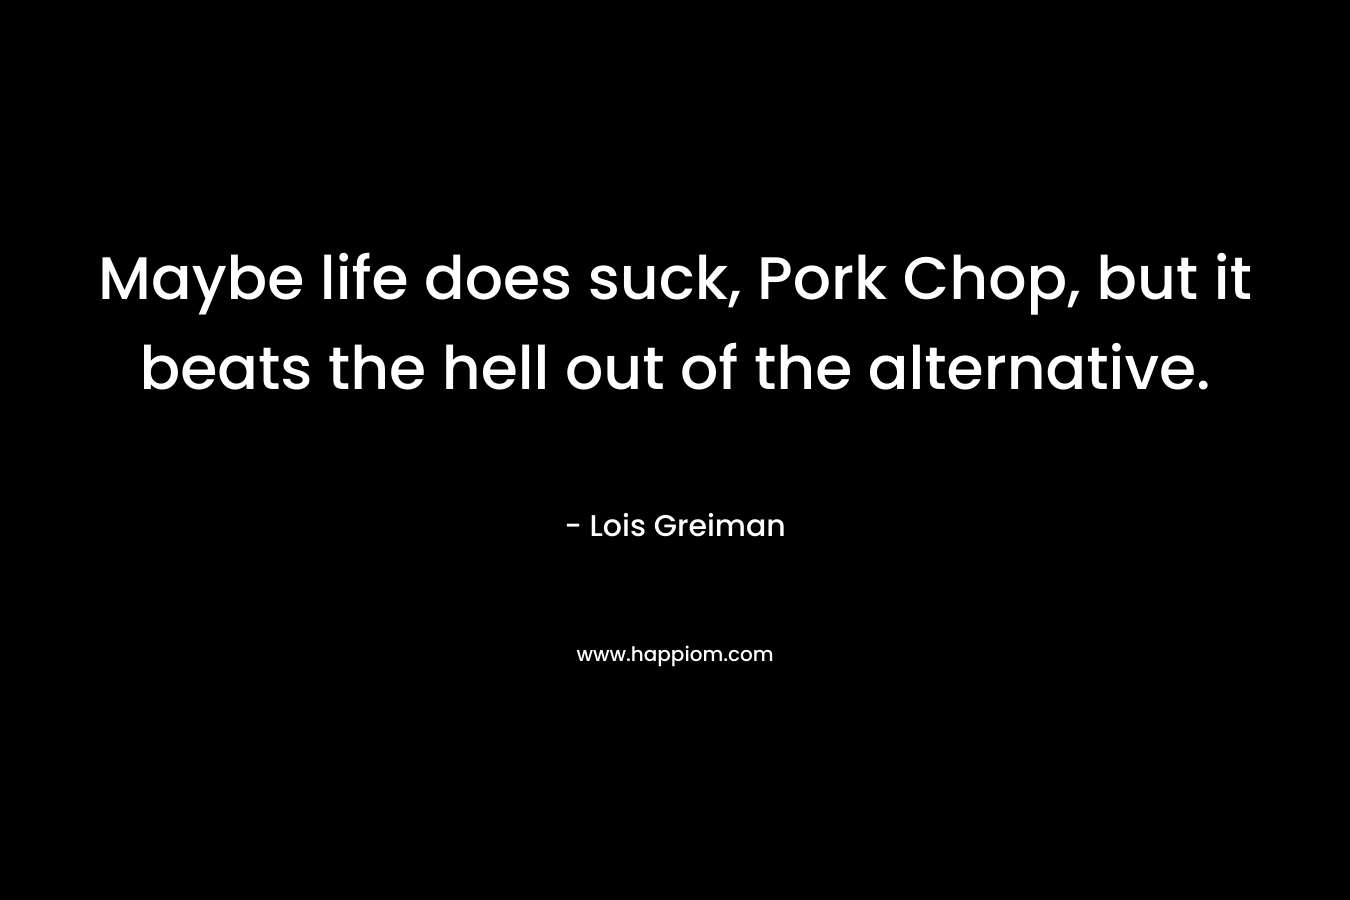 Maybe life does suck, Pork Chop, but it beats the hell out of the alternative. – Lois Greiman